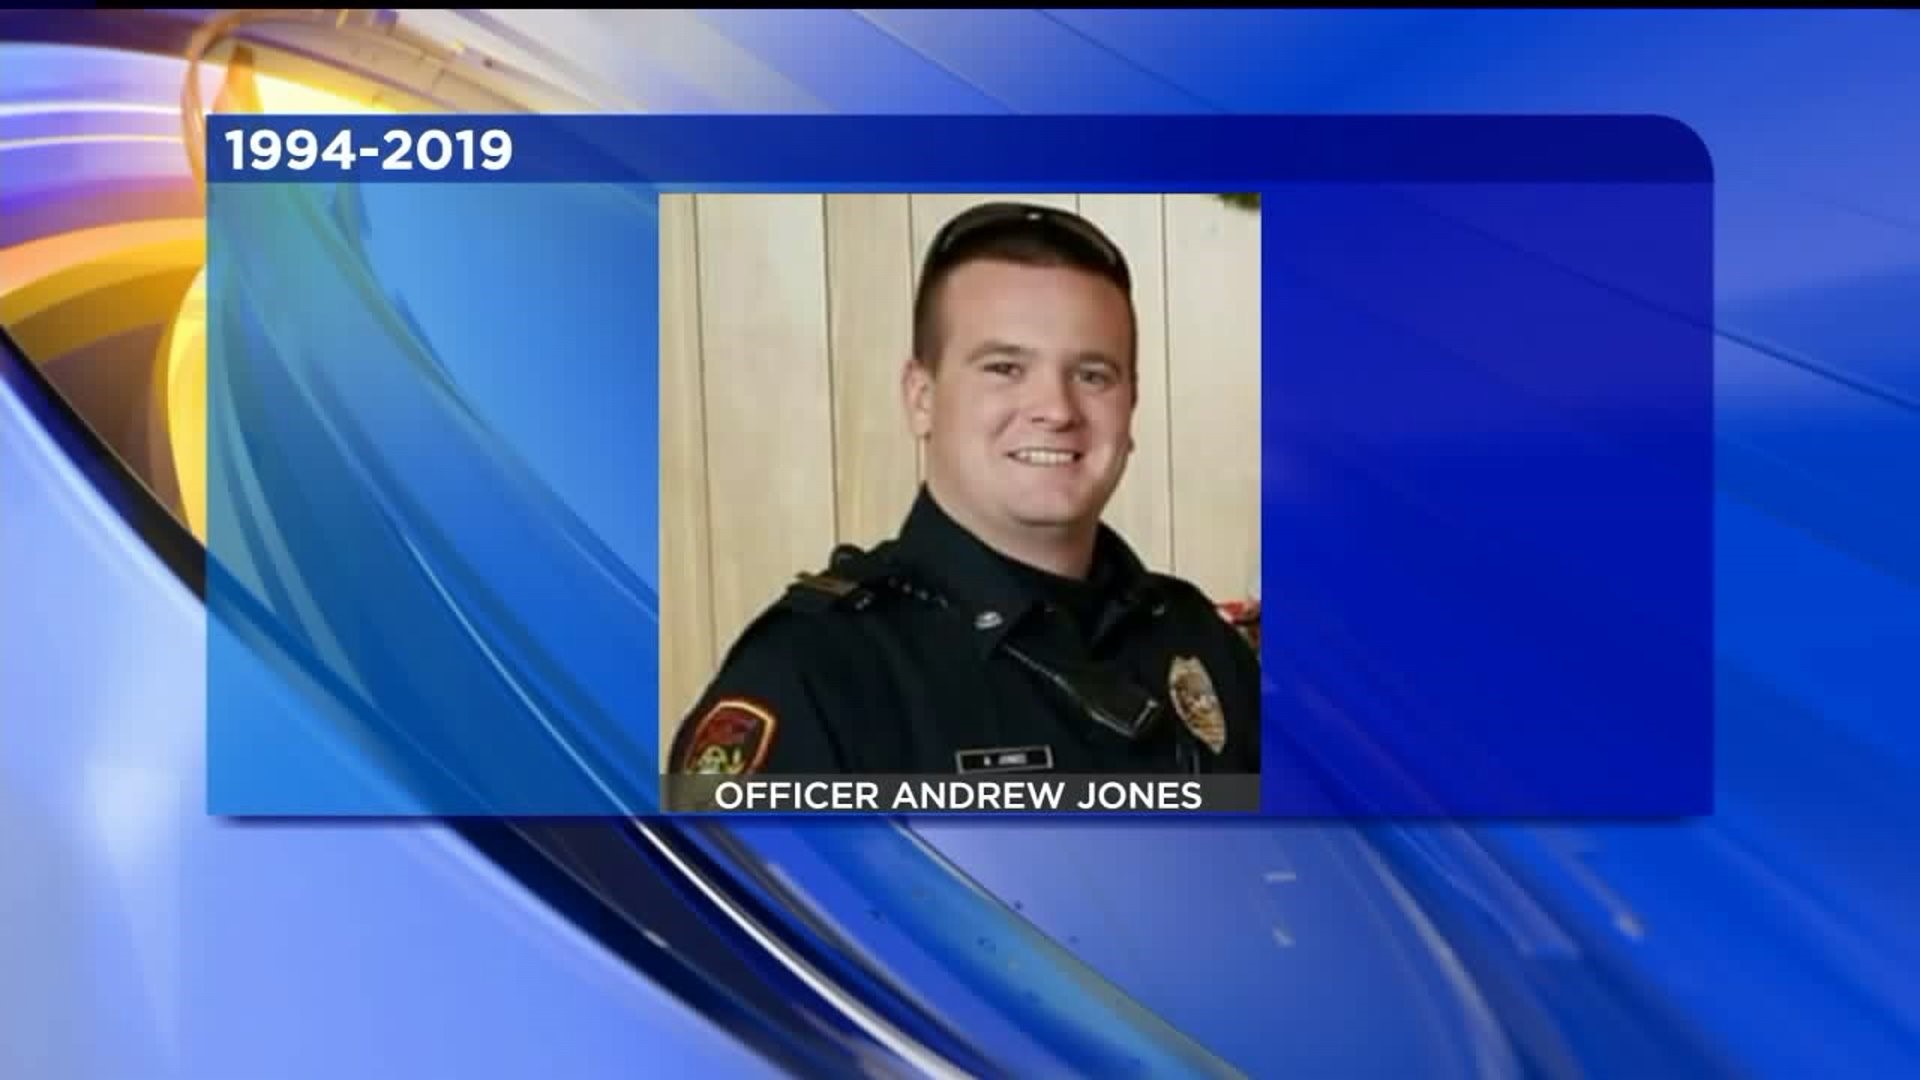 Police, Fire Departments Mourn Loss of Officer